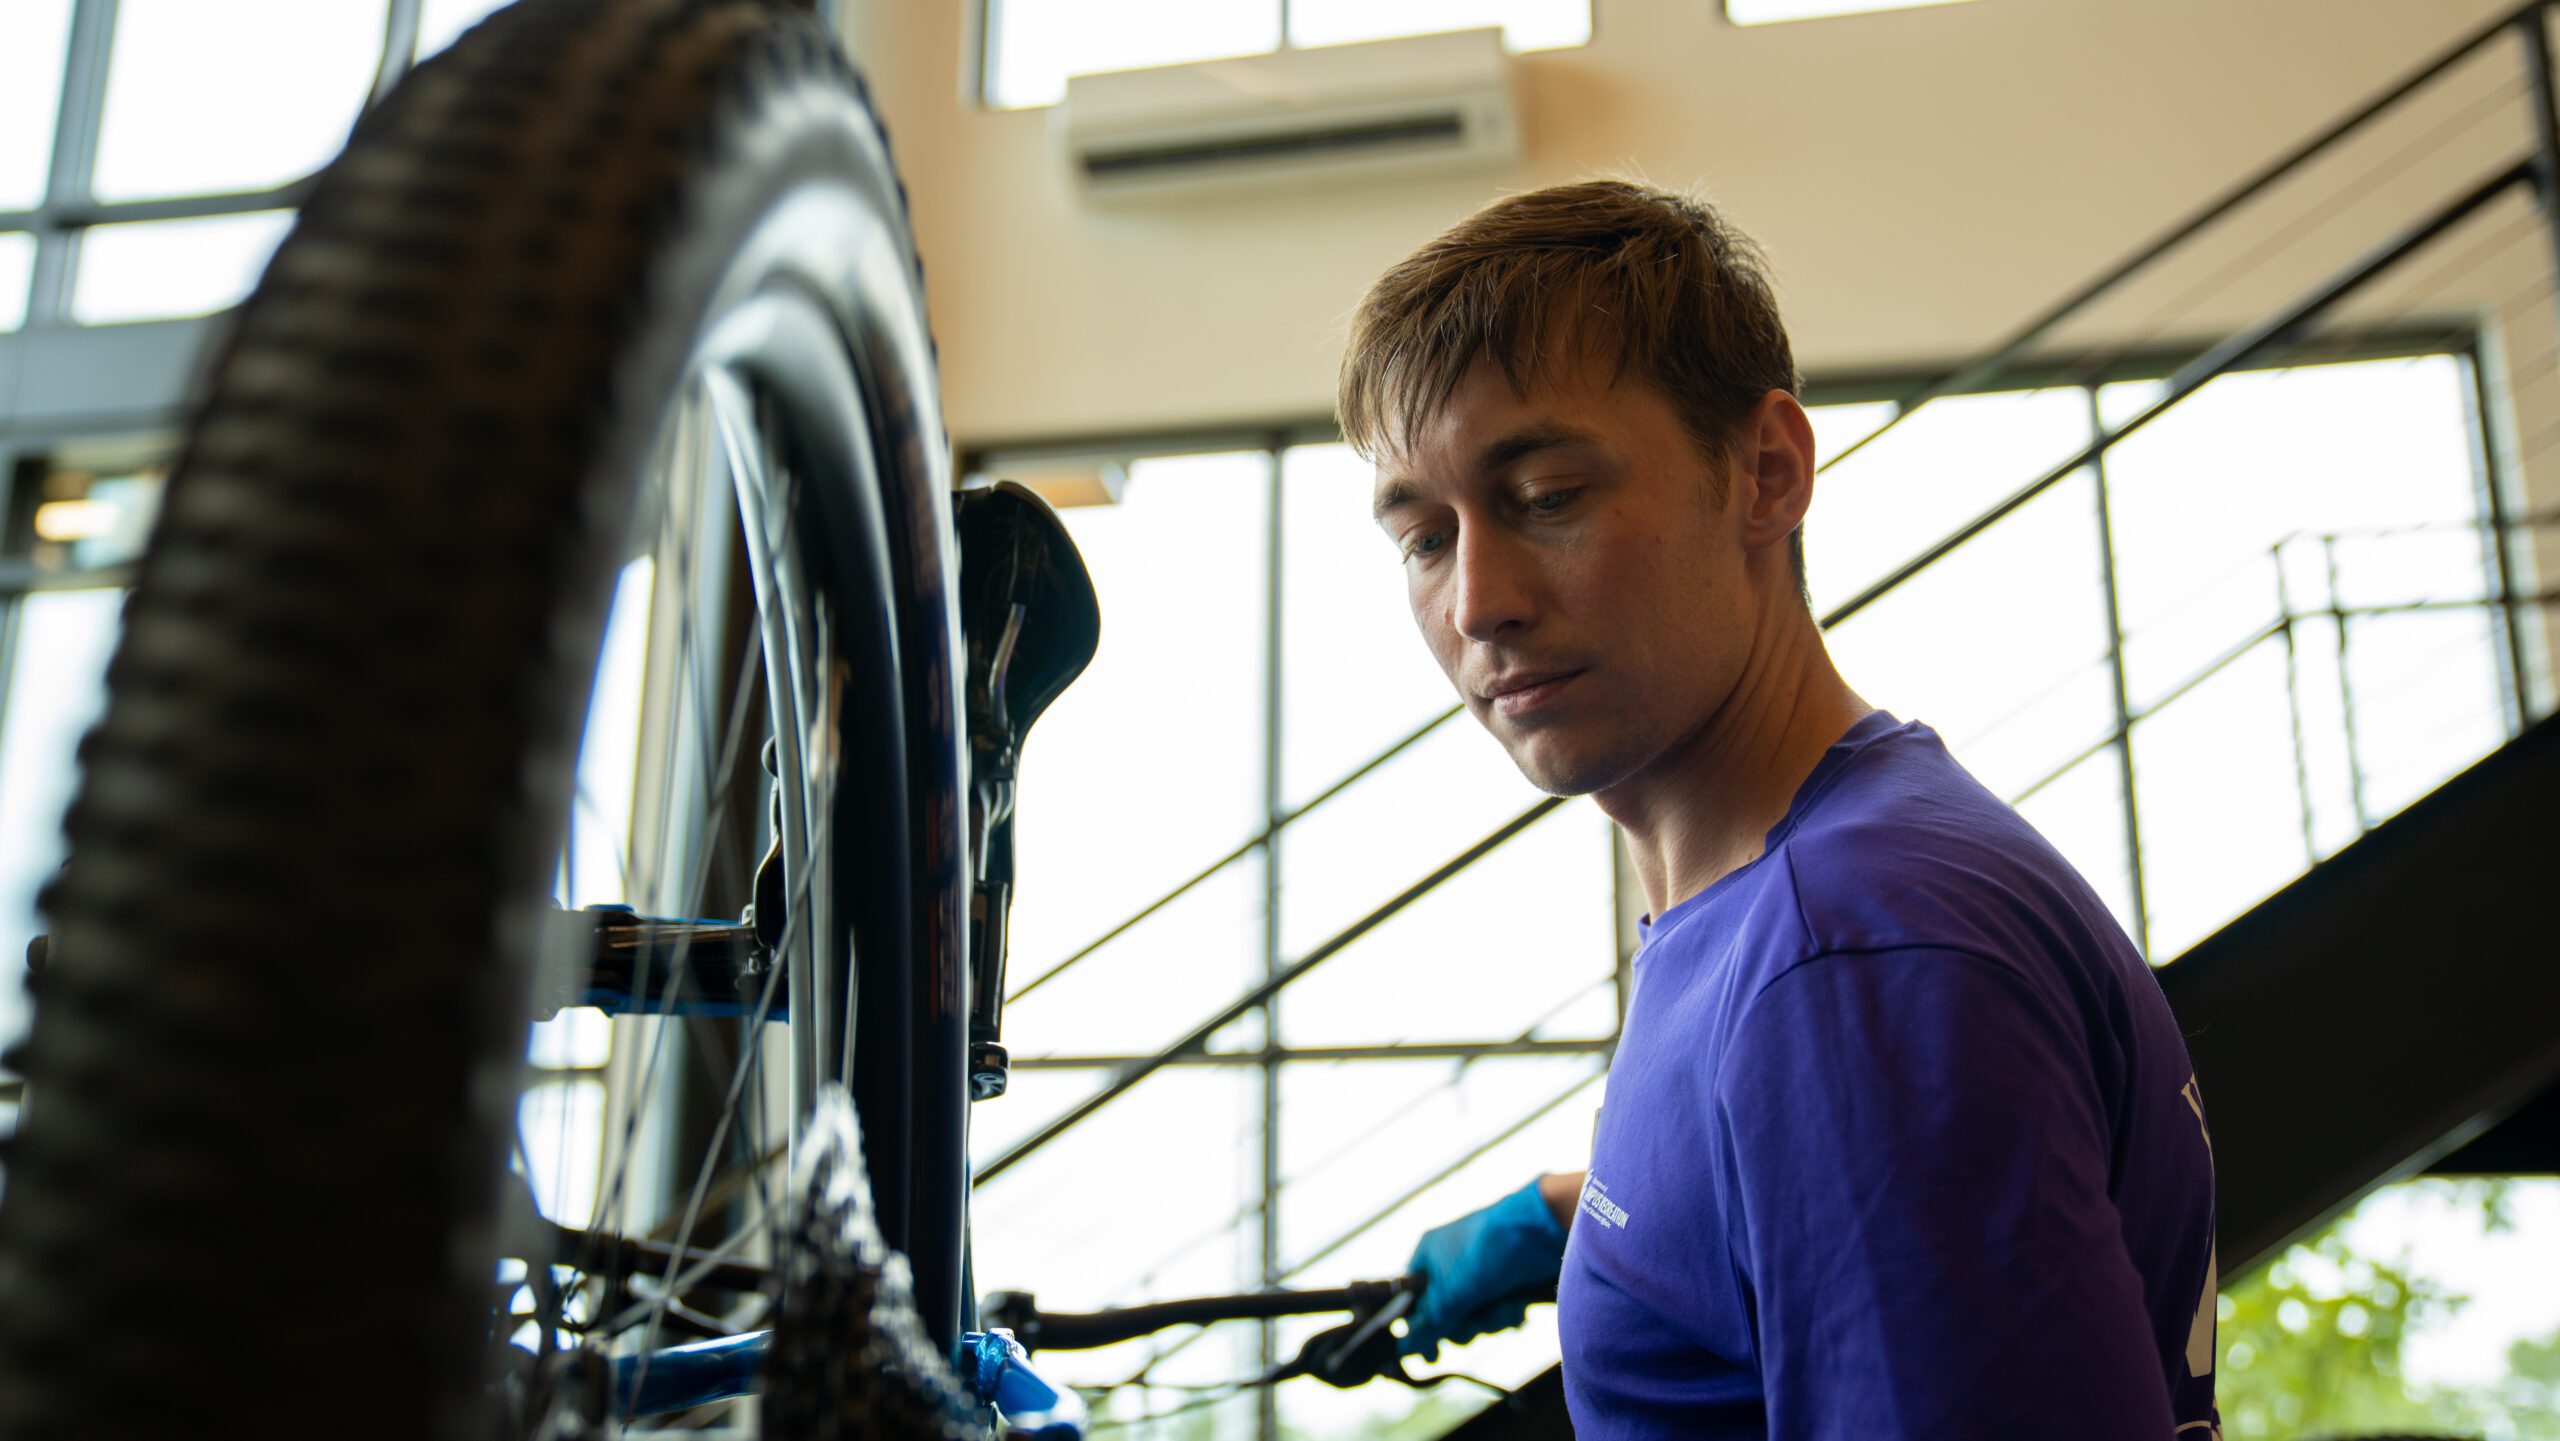 A student repairs a bike in Andy Quattlebaum Outdoor Education Center